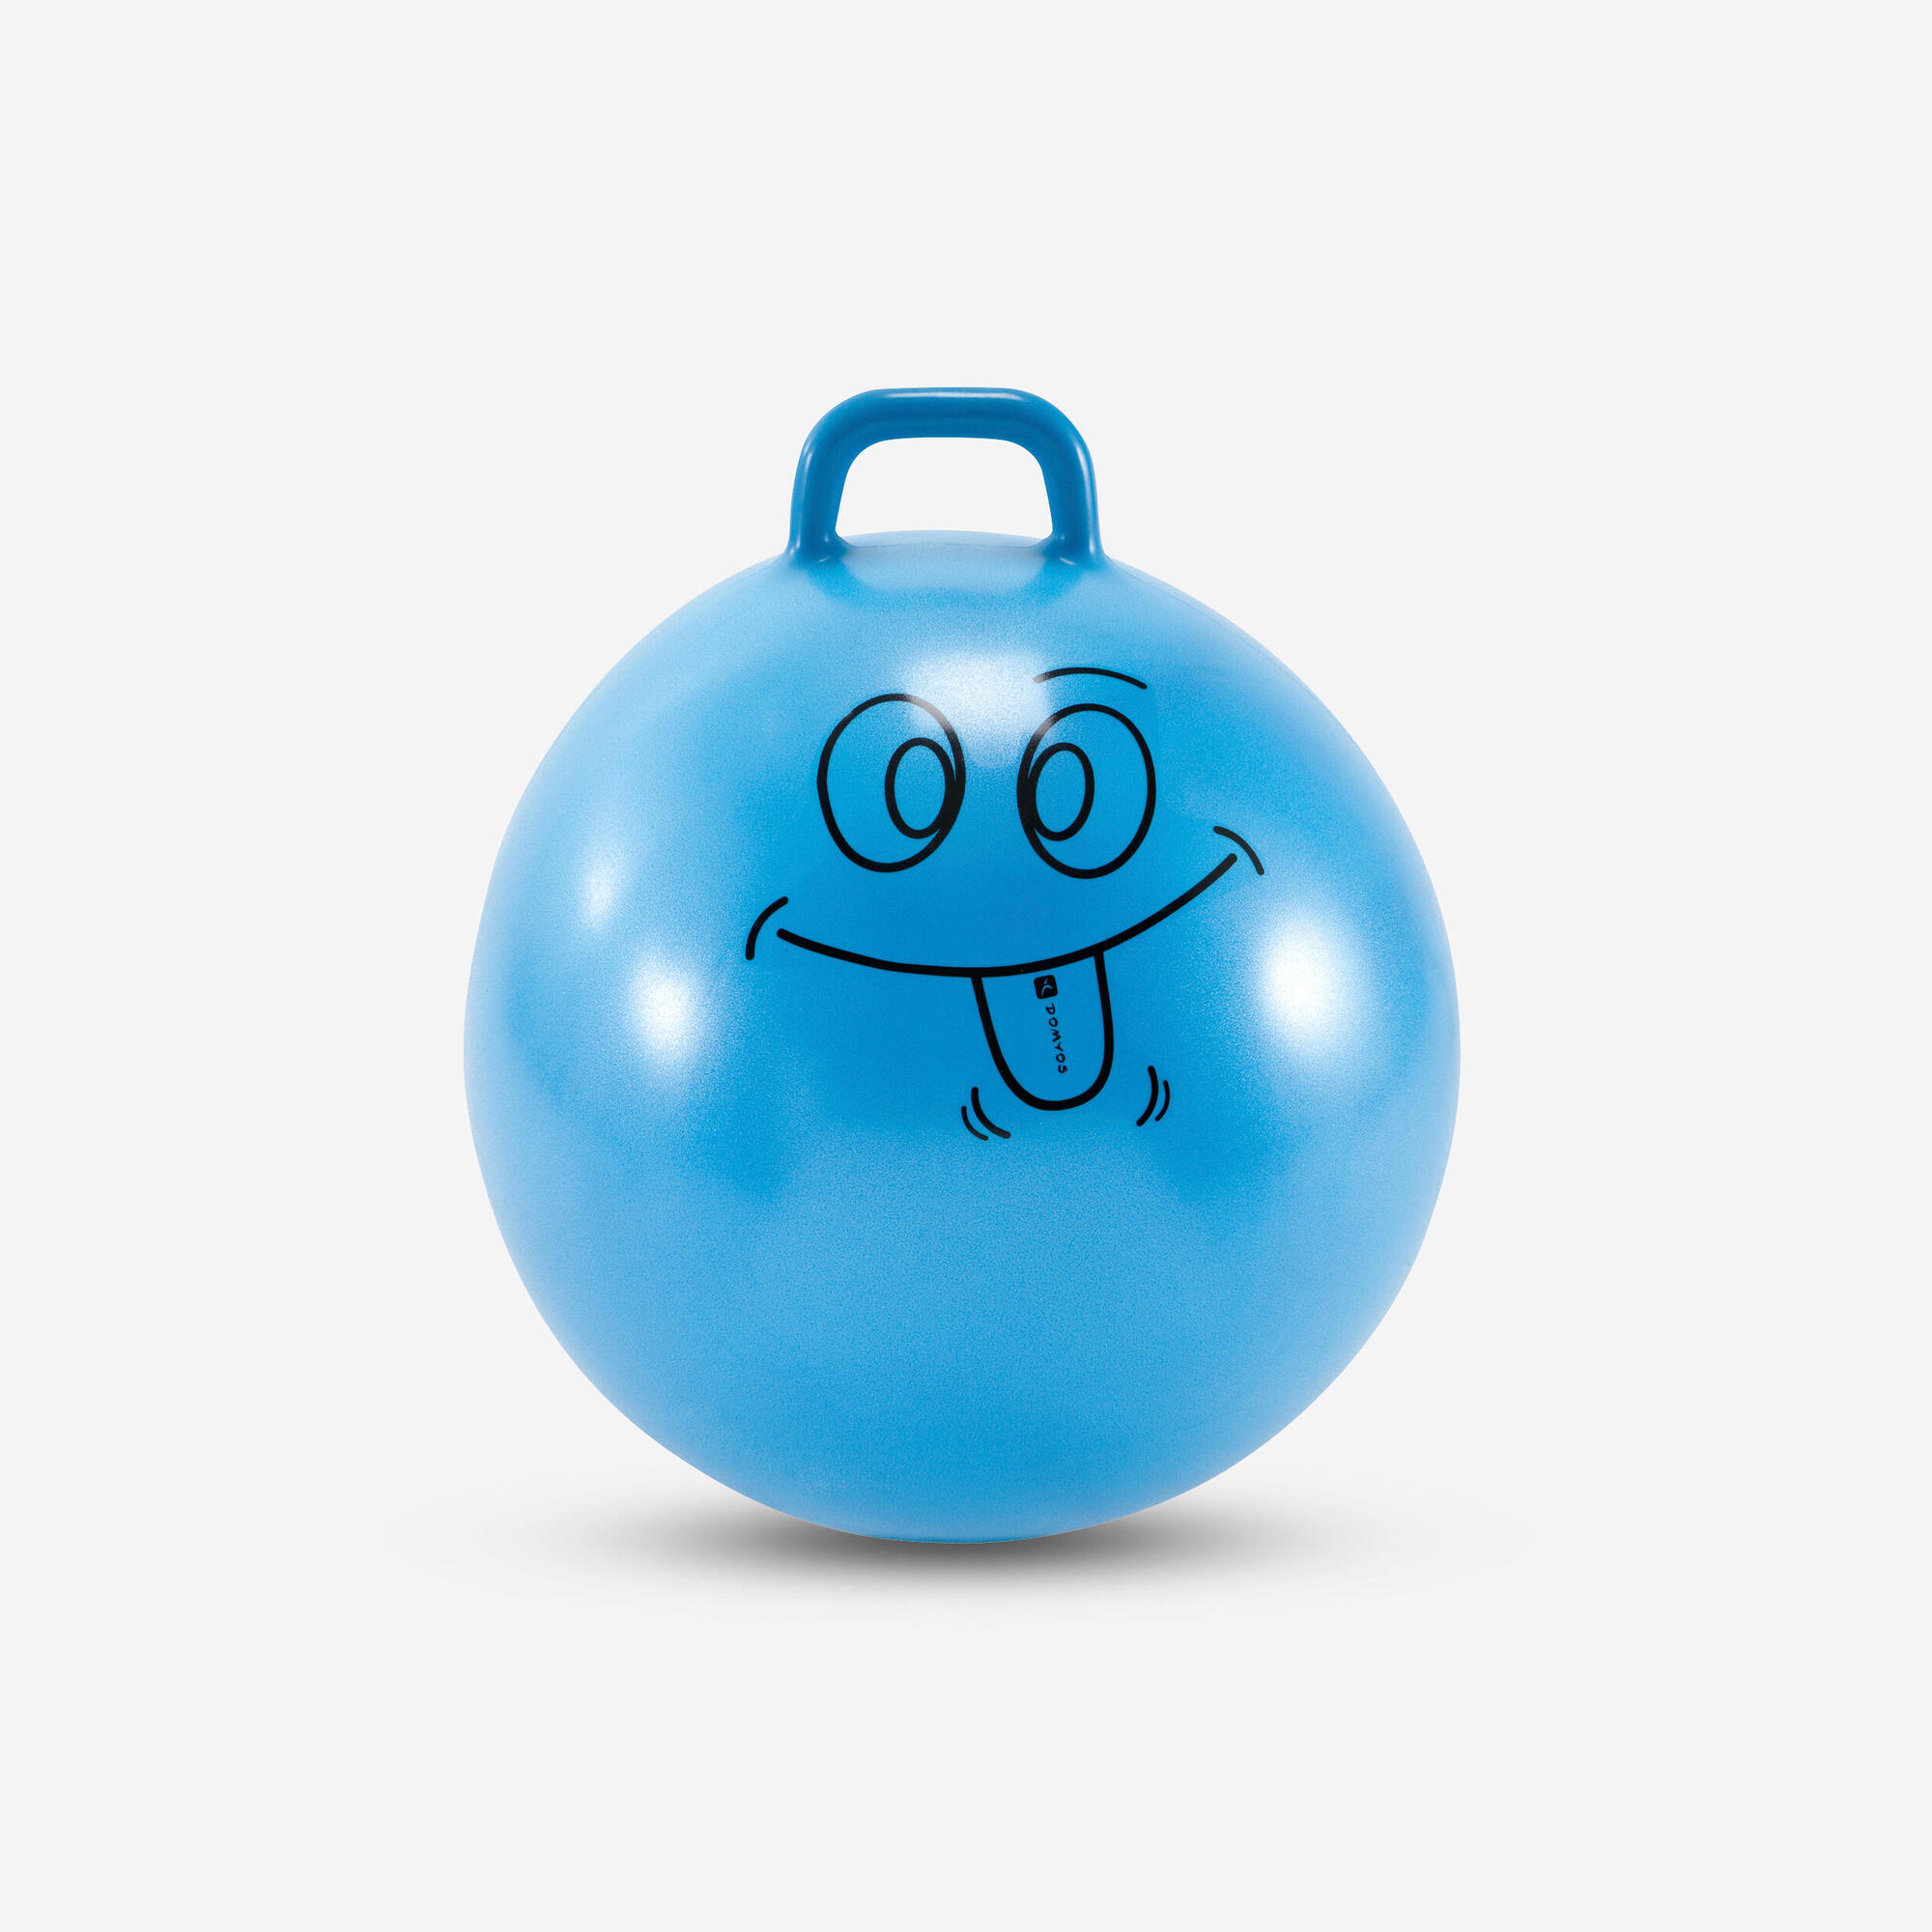 space hopper for 2 year old